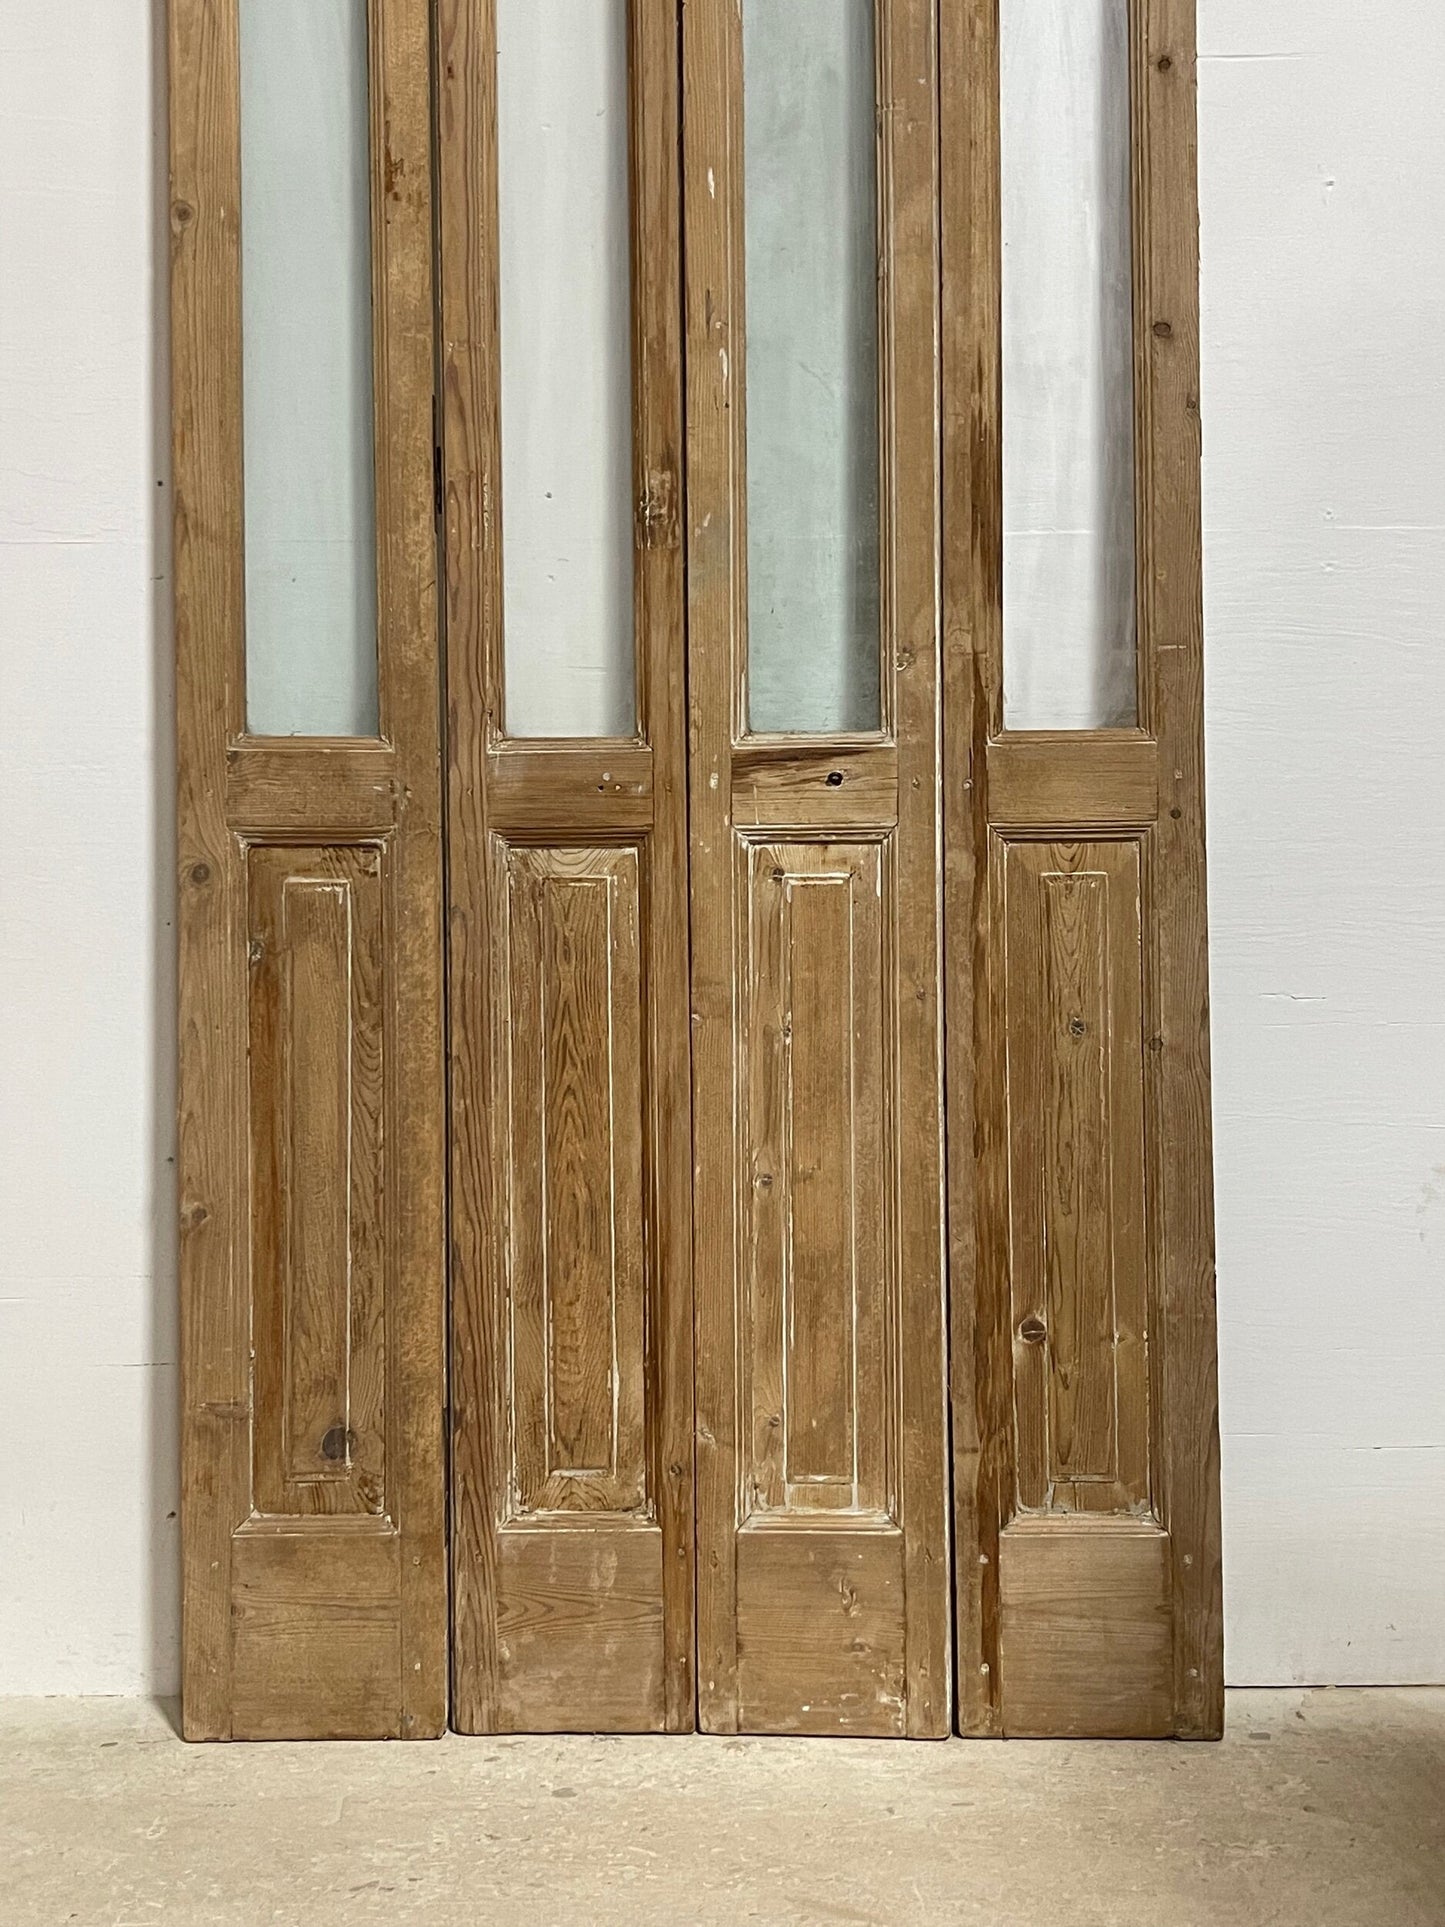 Antique French doors with glass (96x41.5) H0241s